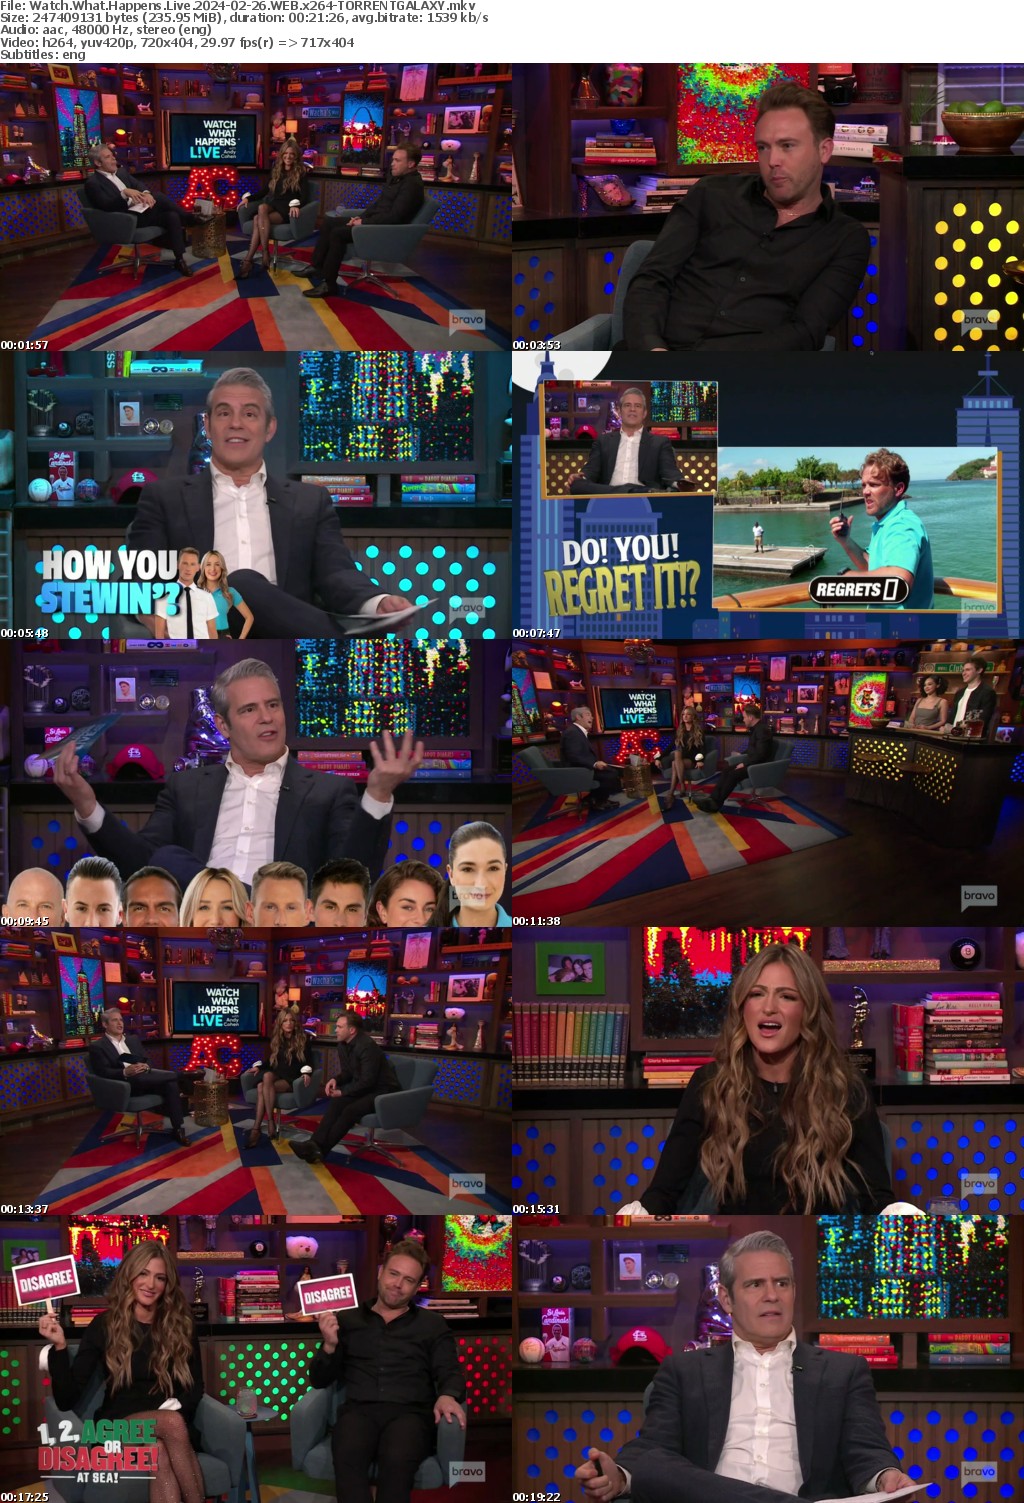 Watch What Happens Live 2024-02-26 WEB x264-GALAXY